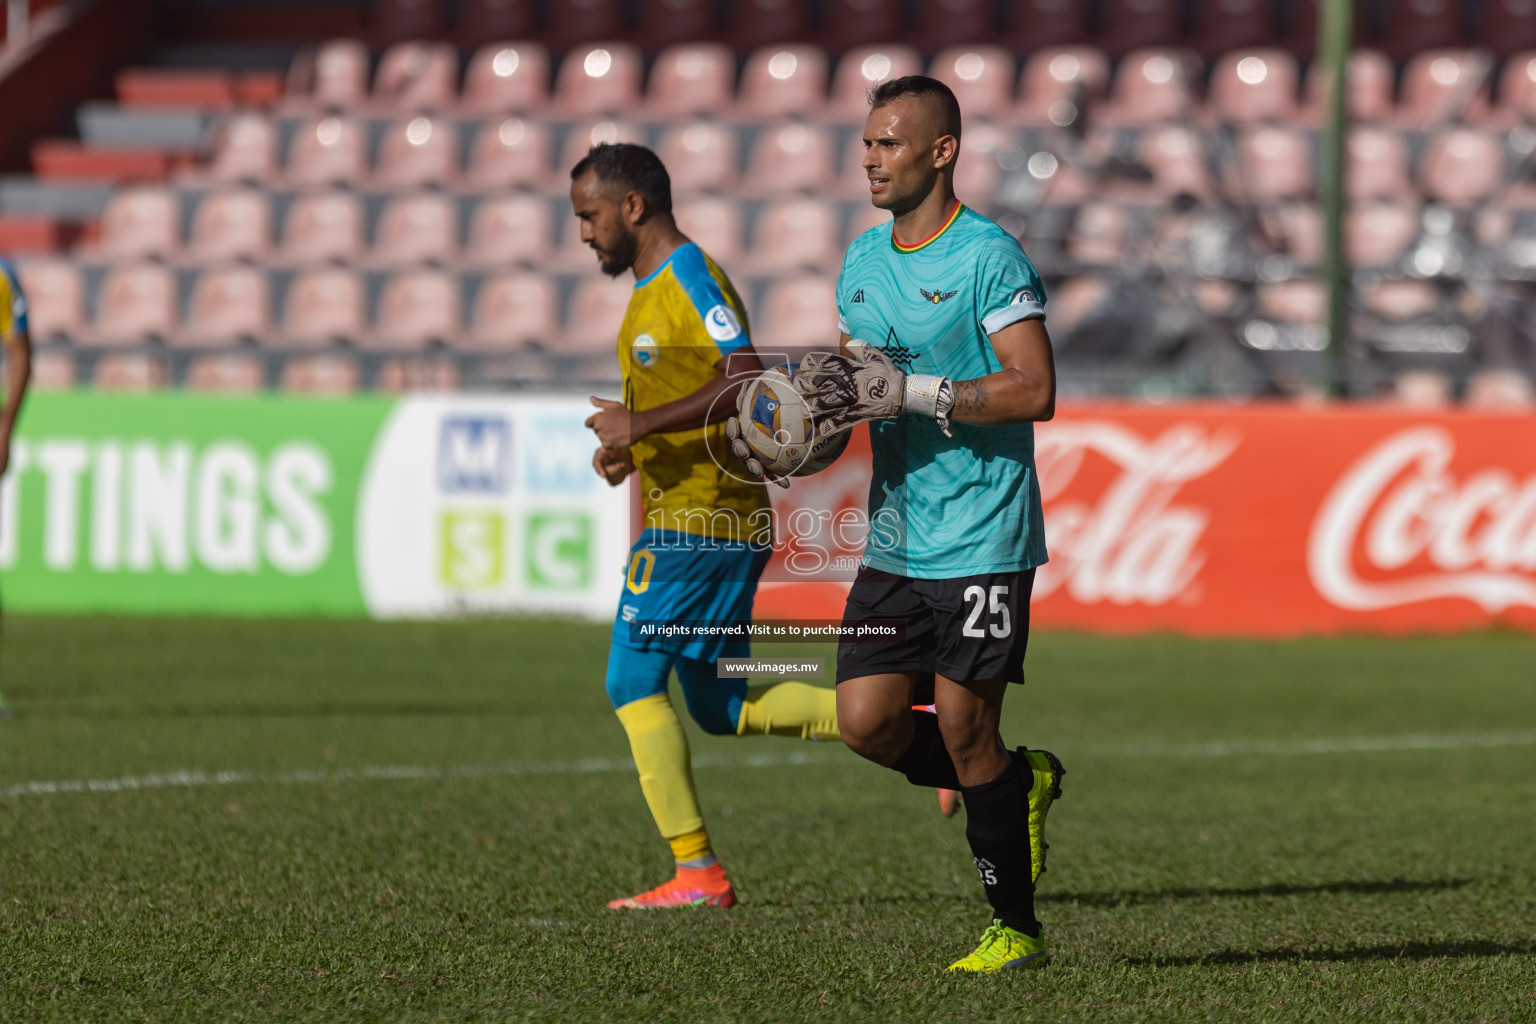 Club Valencia vs De Grande Sports Club in Ooredoo Dhivehi Premier League 2021/22 on 16th July 2022, held in National Football Stadium, Male', Maldives Photos: Hassan Simah/ Images mv